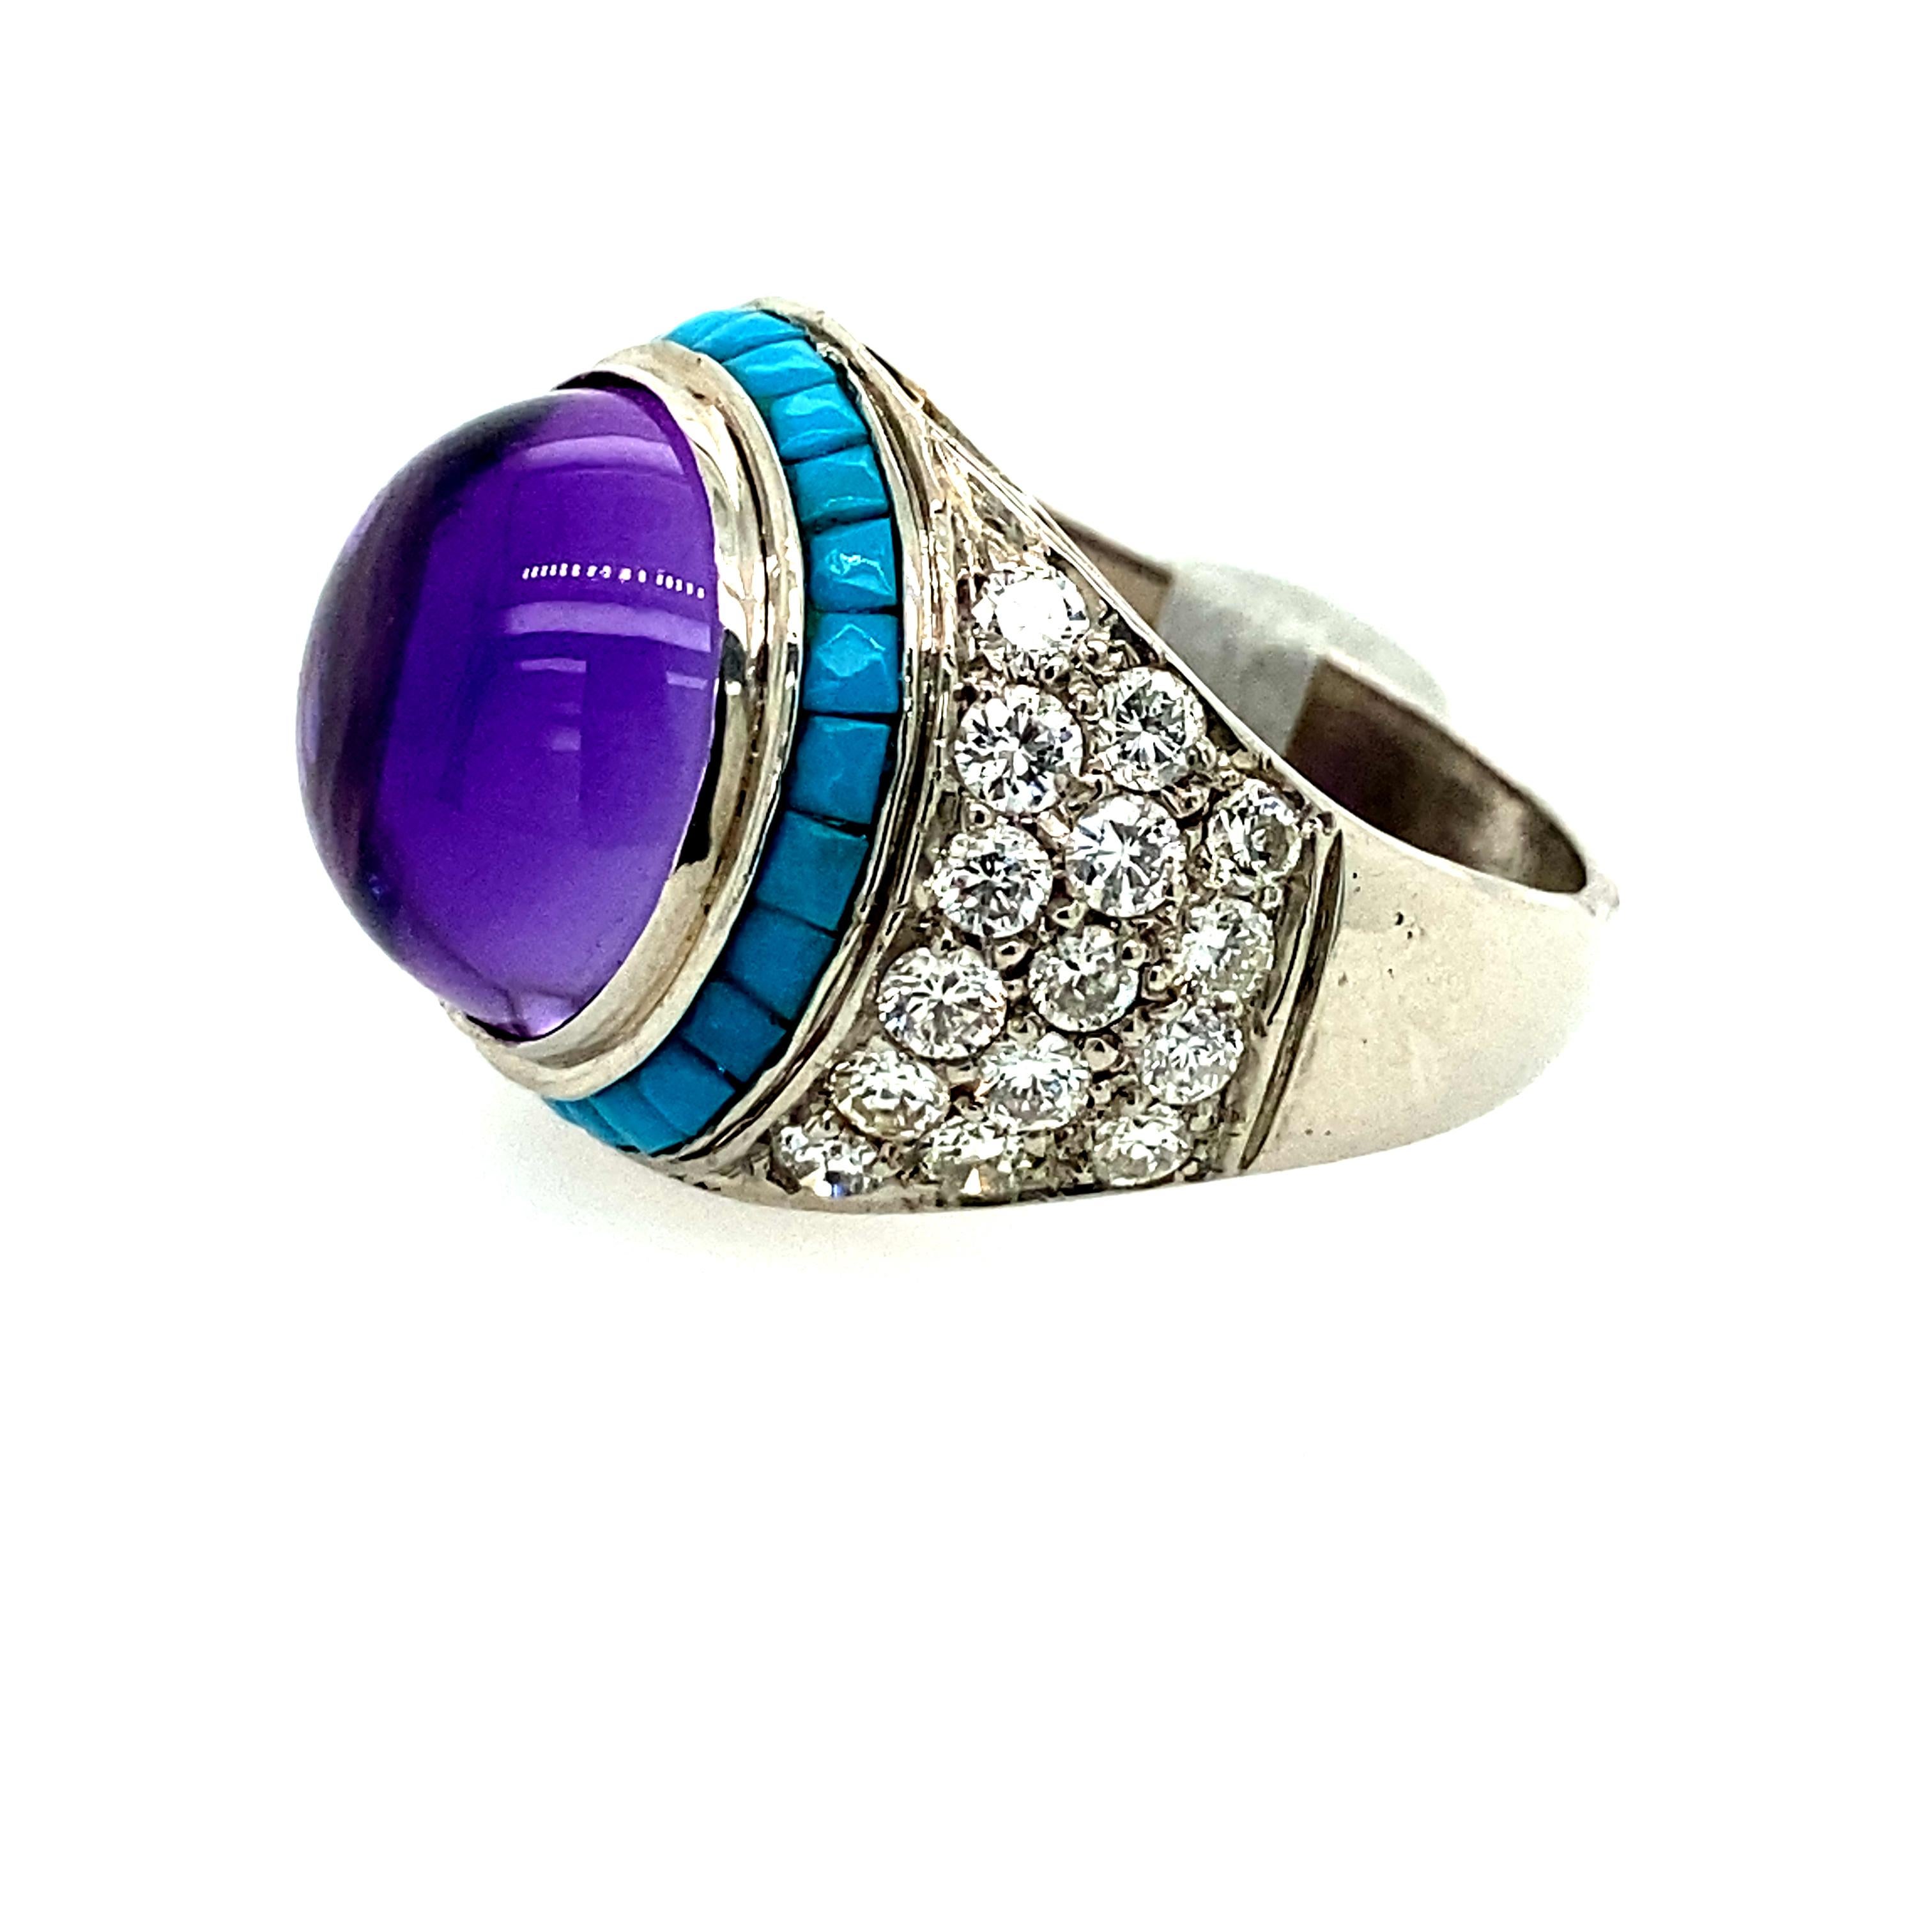 Amethyst, Turquoise and Diamond Ring set in 18k white gold. The ring has approximately 1.60carats of G color VS clarity diamonds. Set in 18K white gold.  Estate jewelry circa. 1970.